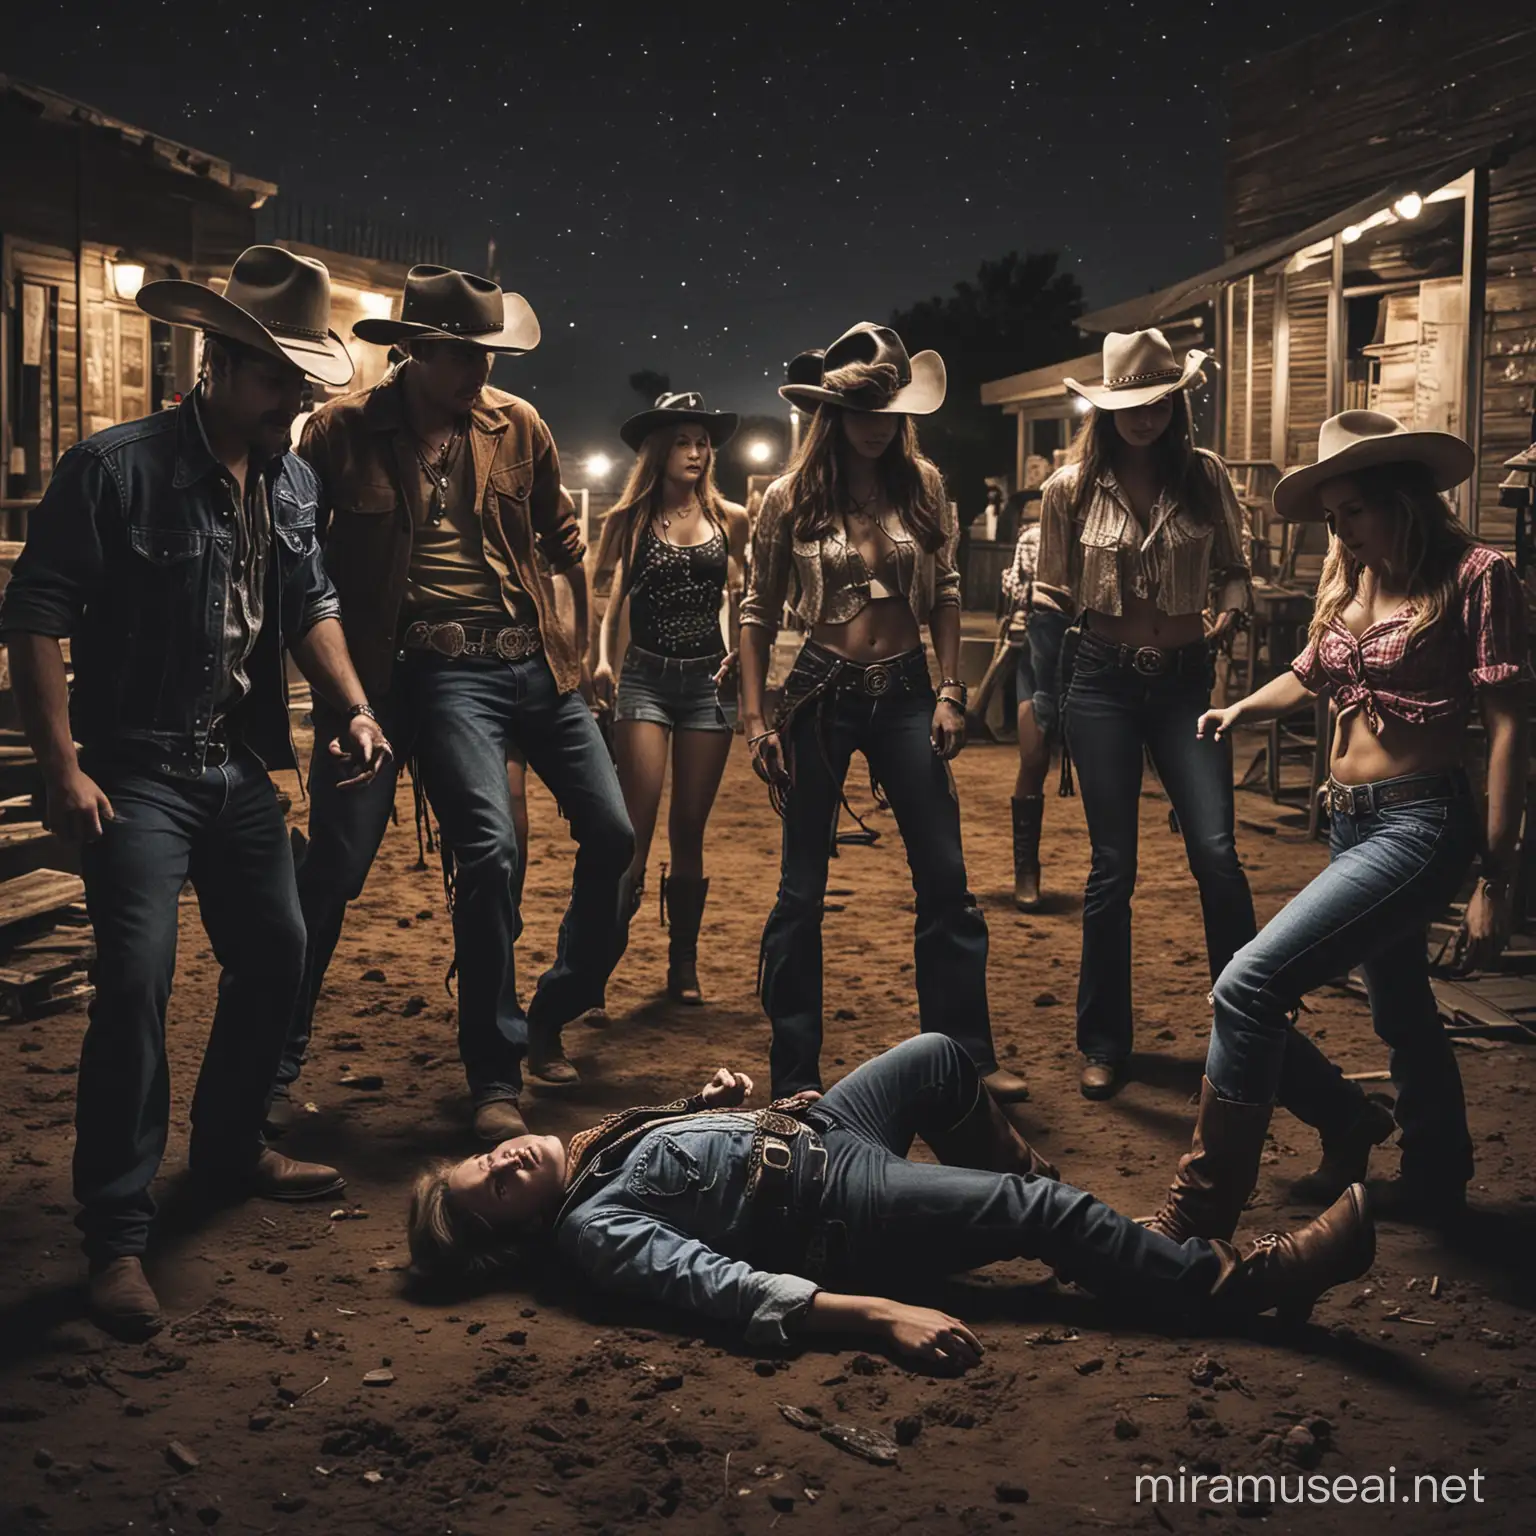 black cow boys and girls outside at night dancing drinking and some laid out drunk. this will be a cd cover so give it a urban graphic design style with the colors amke it pop